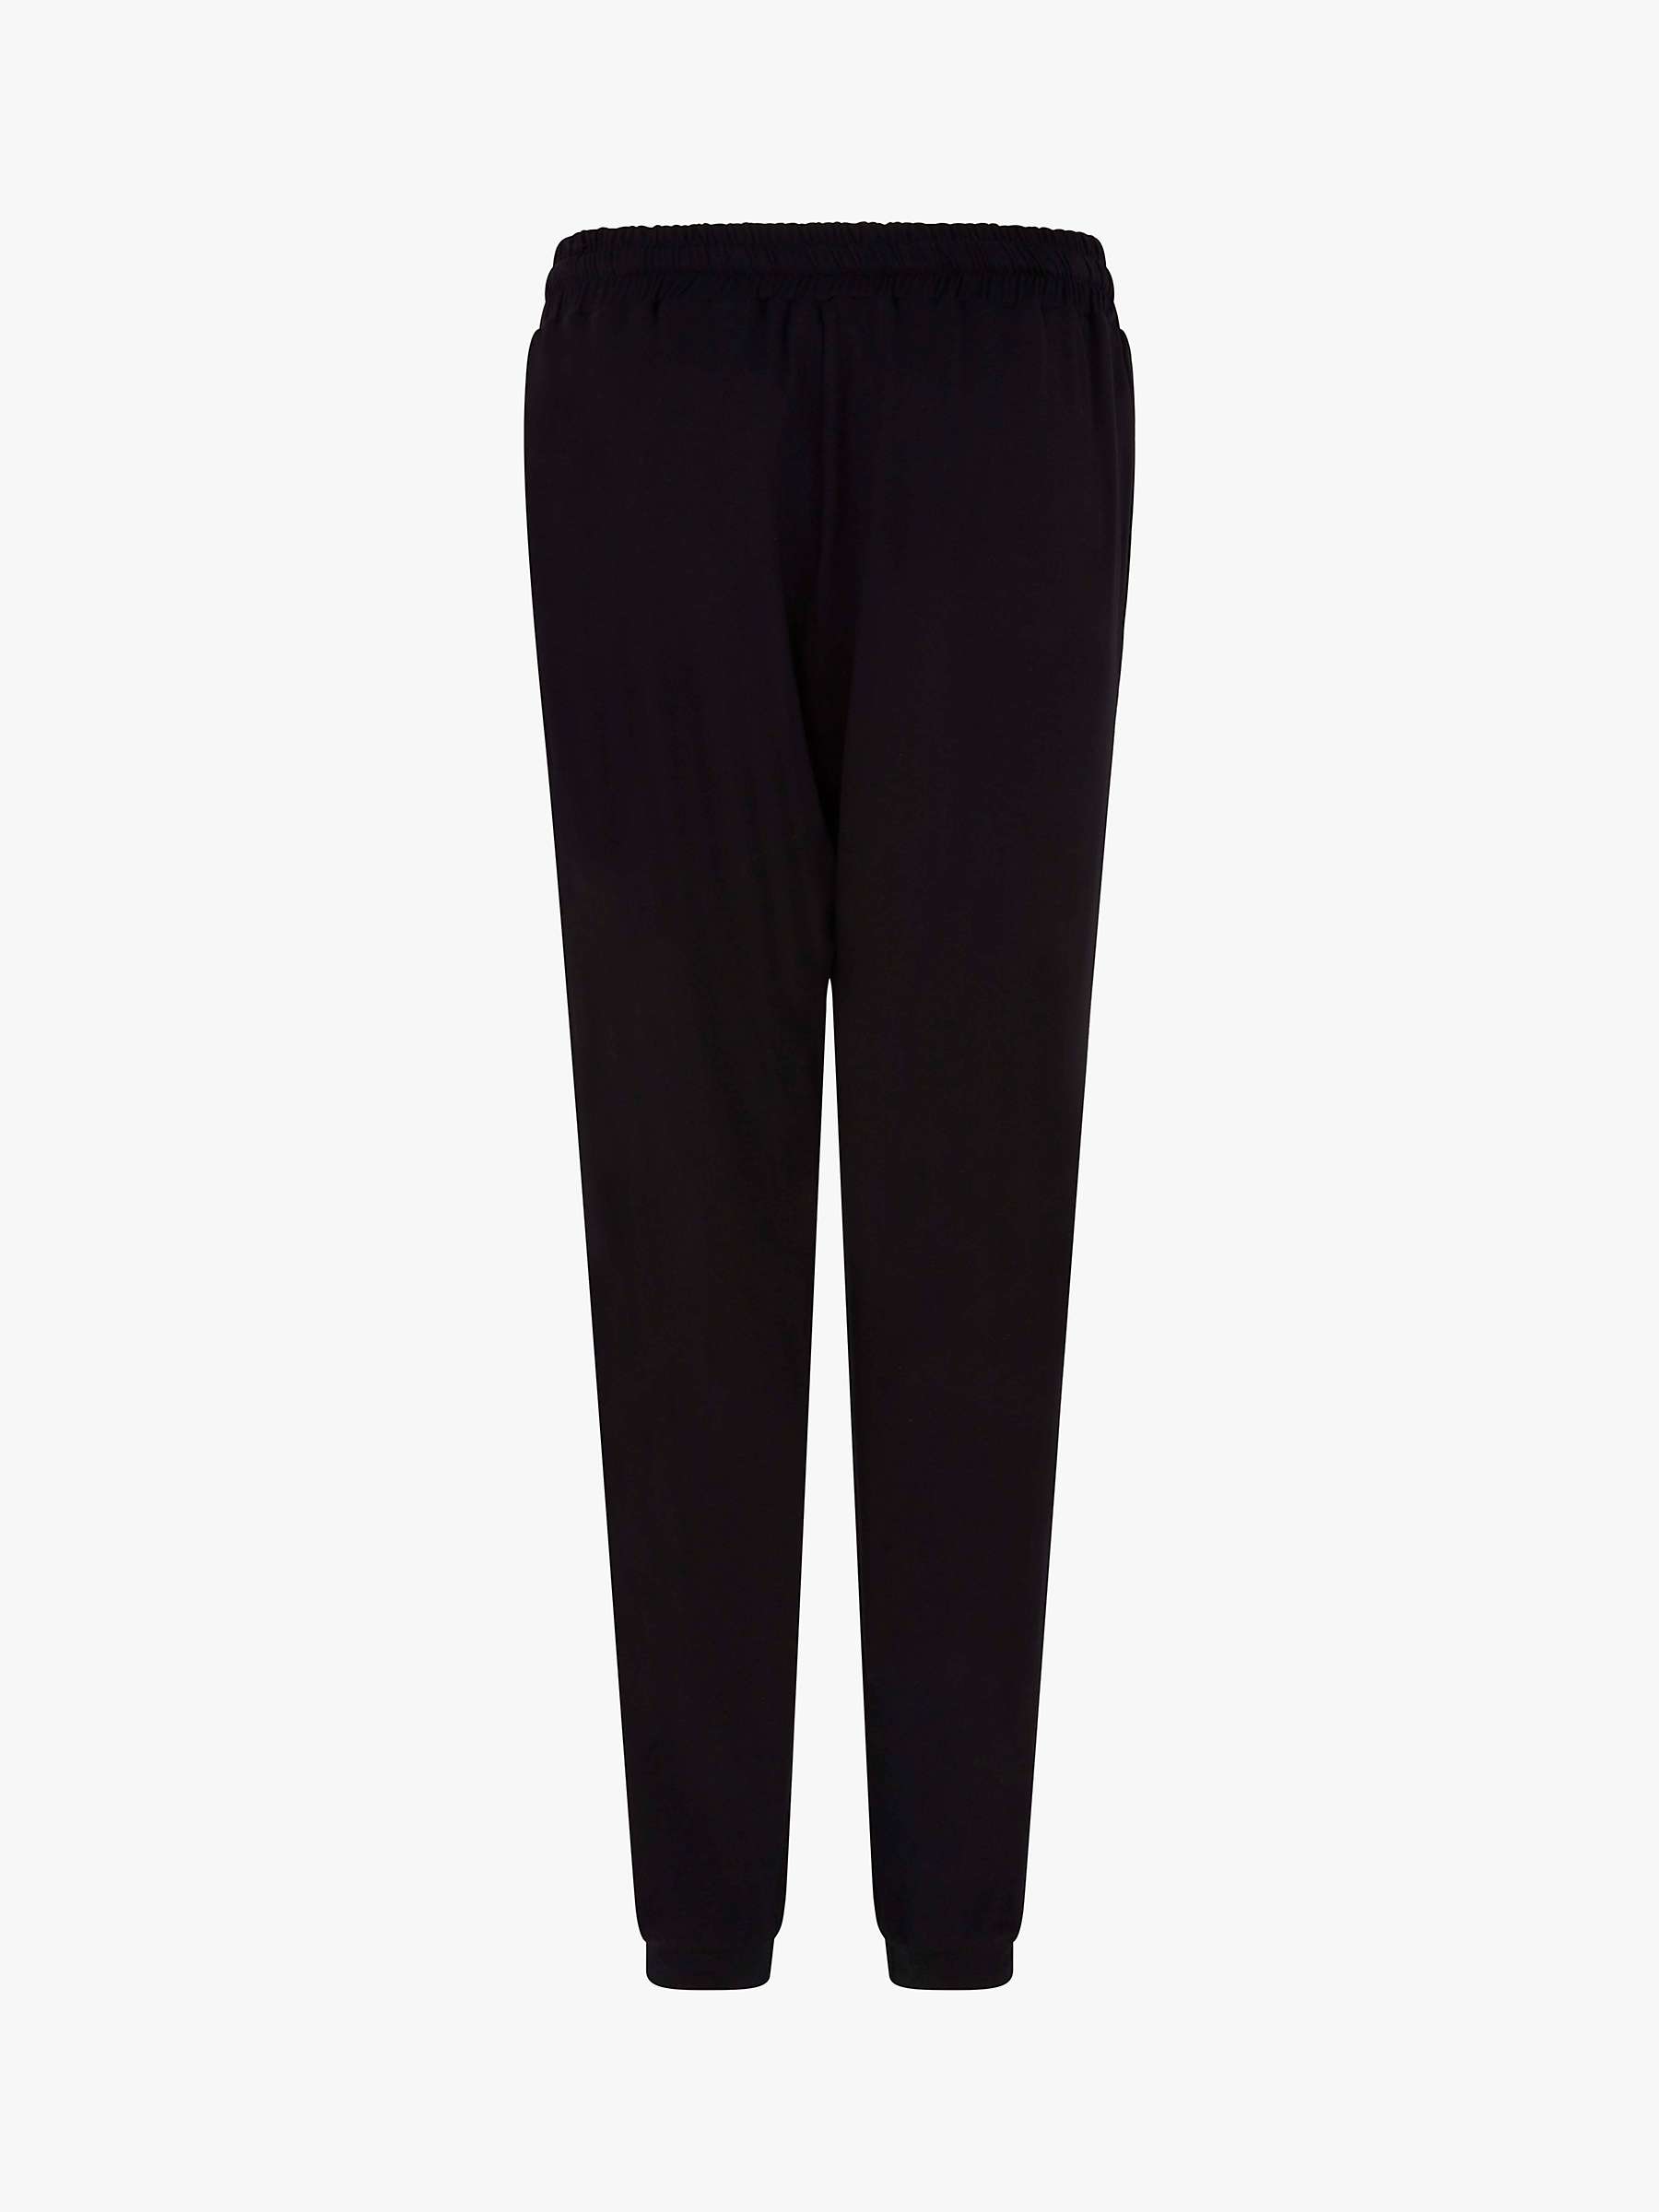 Buy Ghost Jersey Joggers Online at johnlewis.com